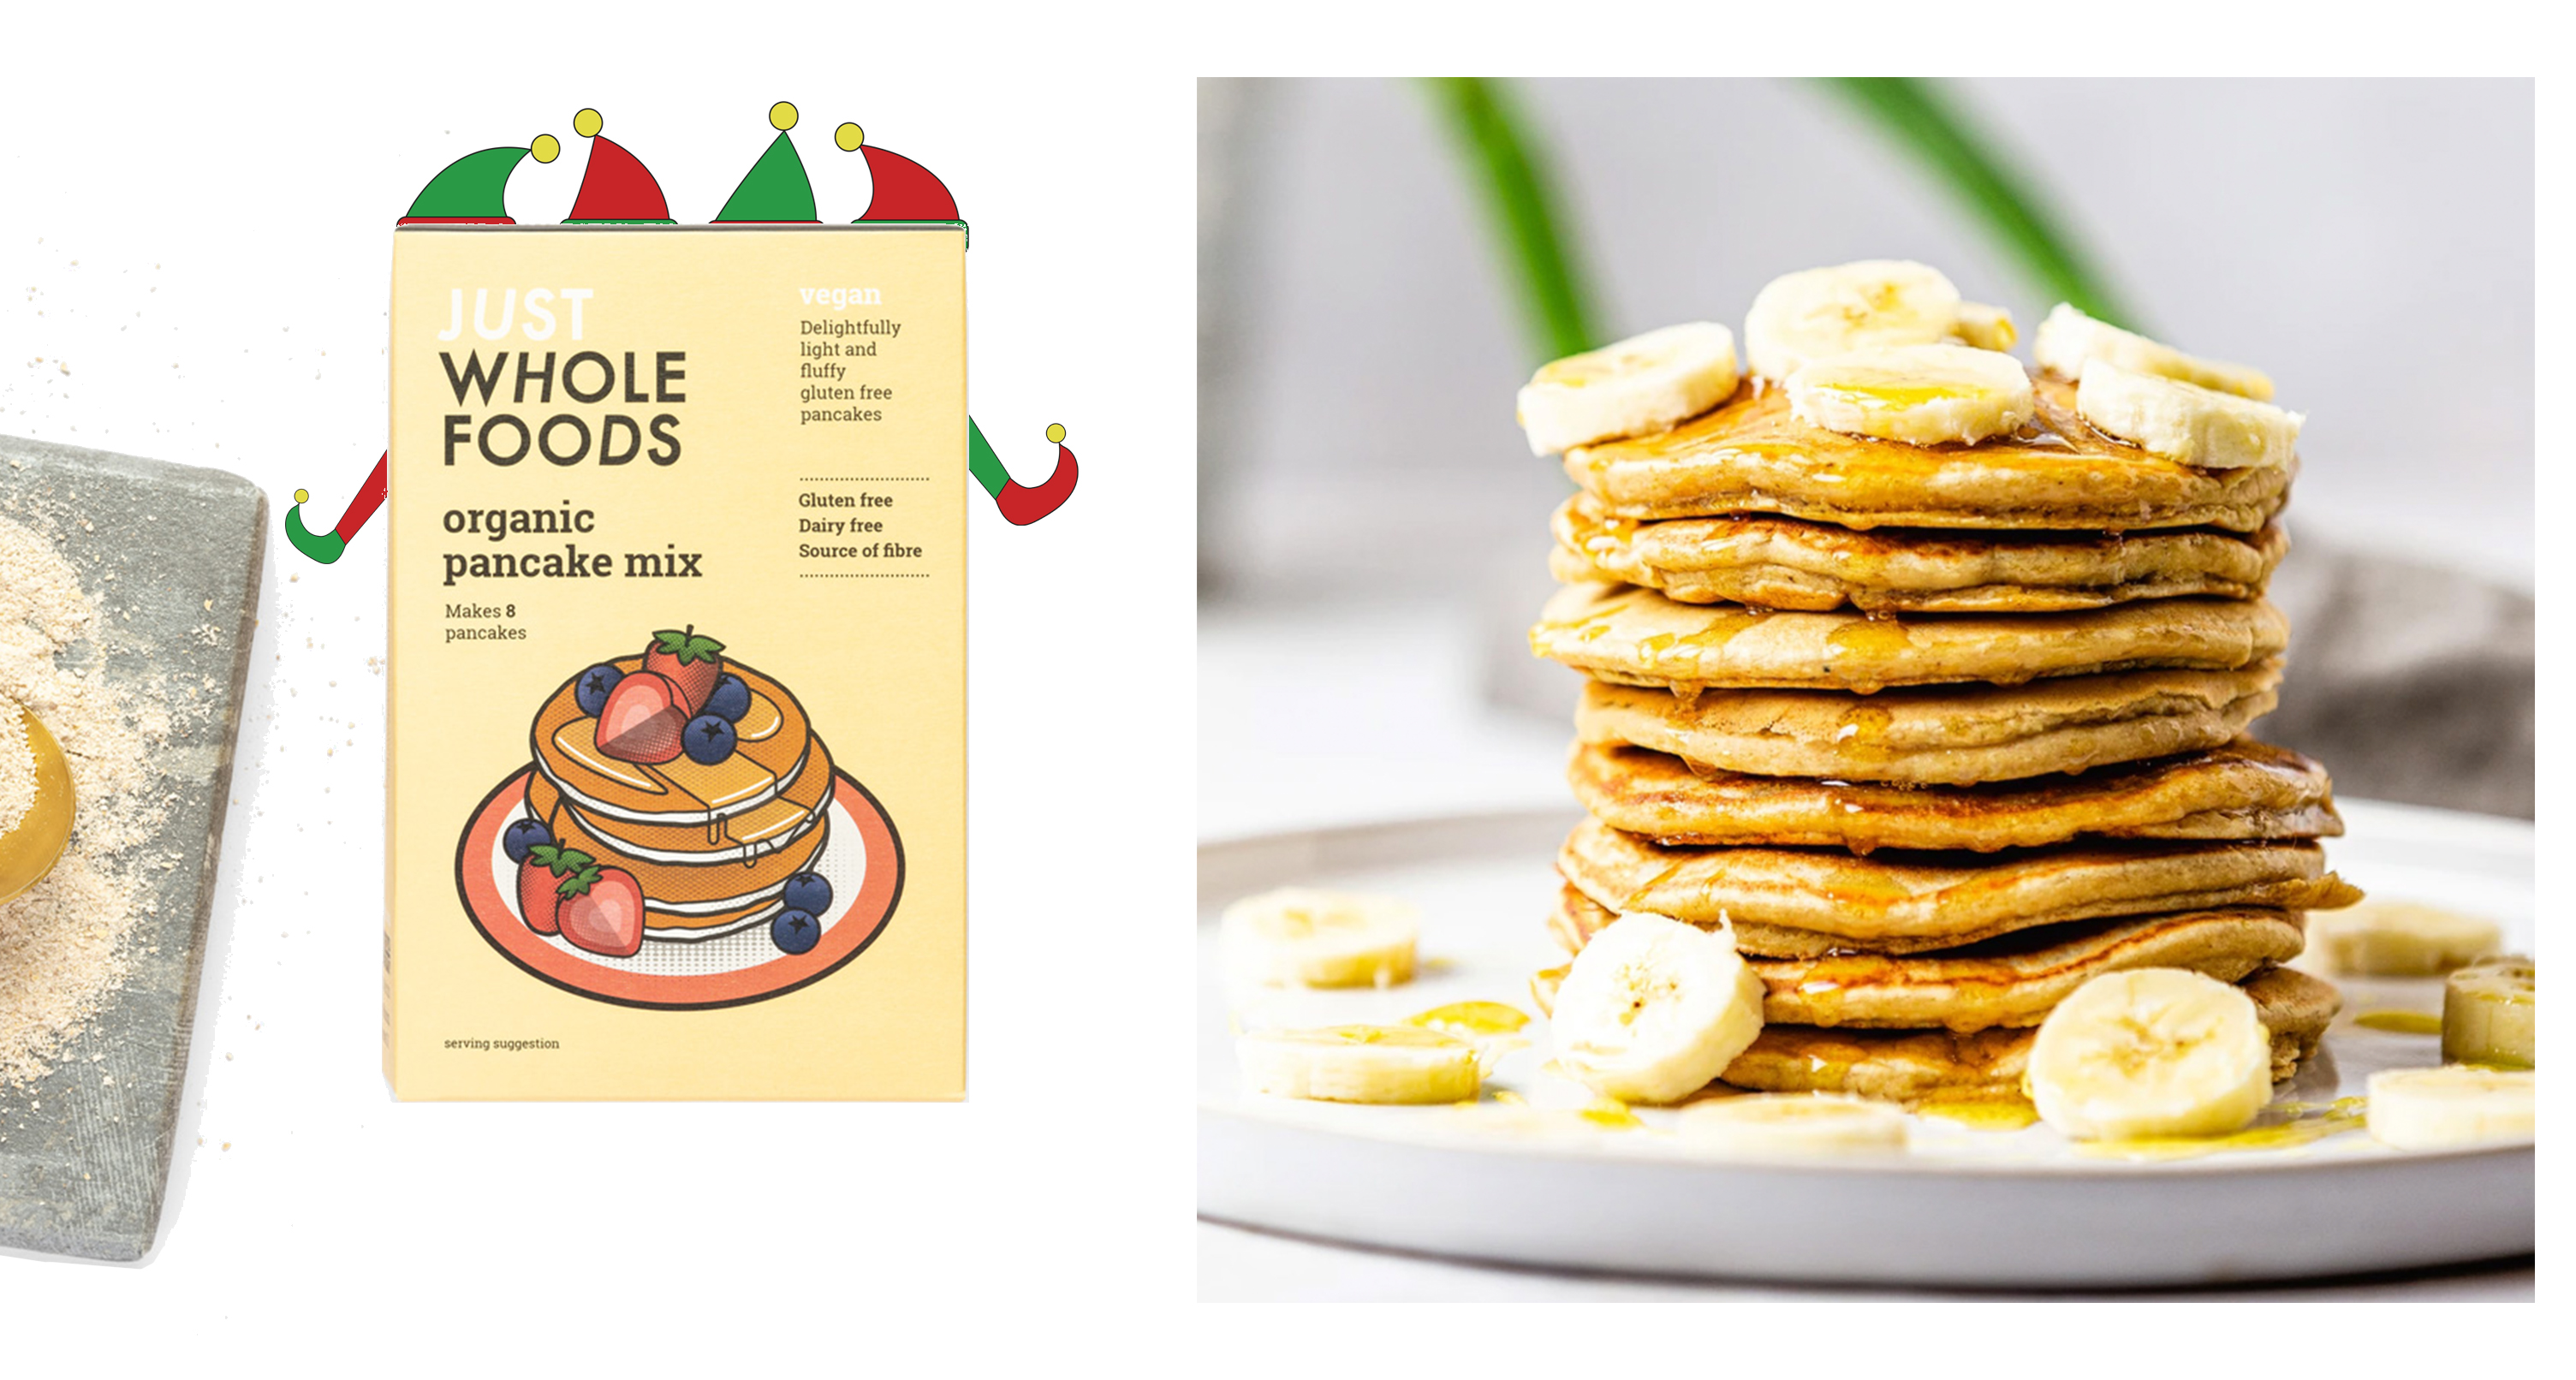 Organic Pancake Mix with fresh pancakes and red and green elves hiding behind the mix box for decoration